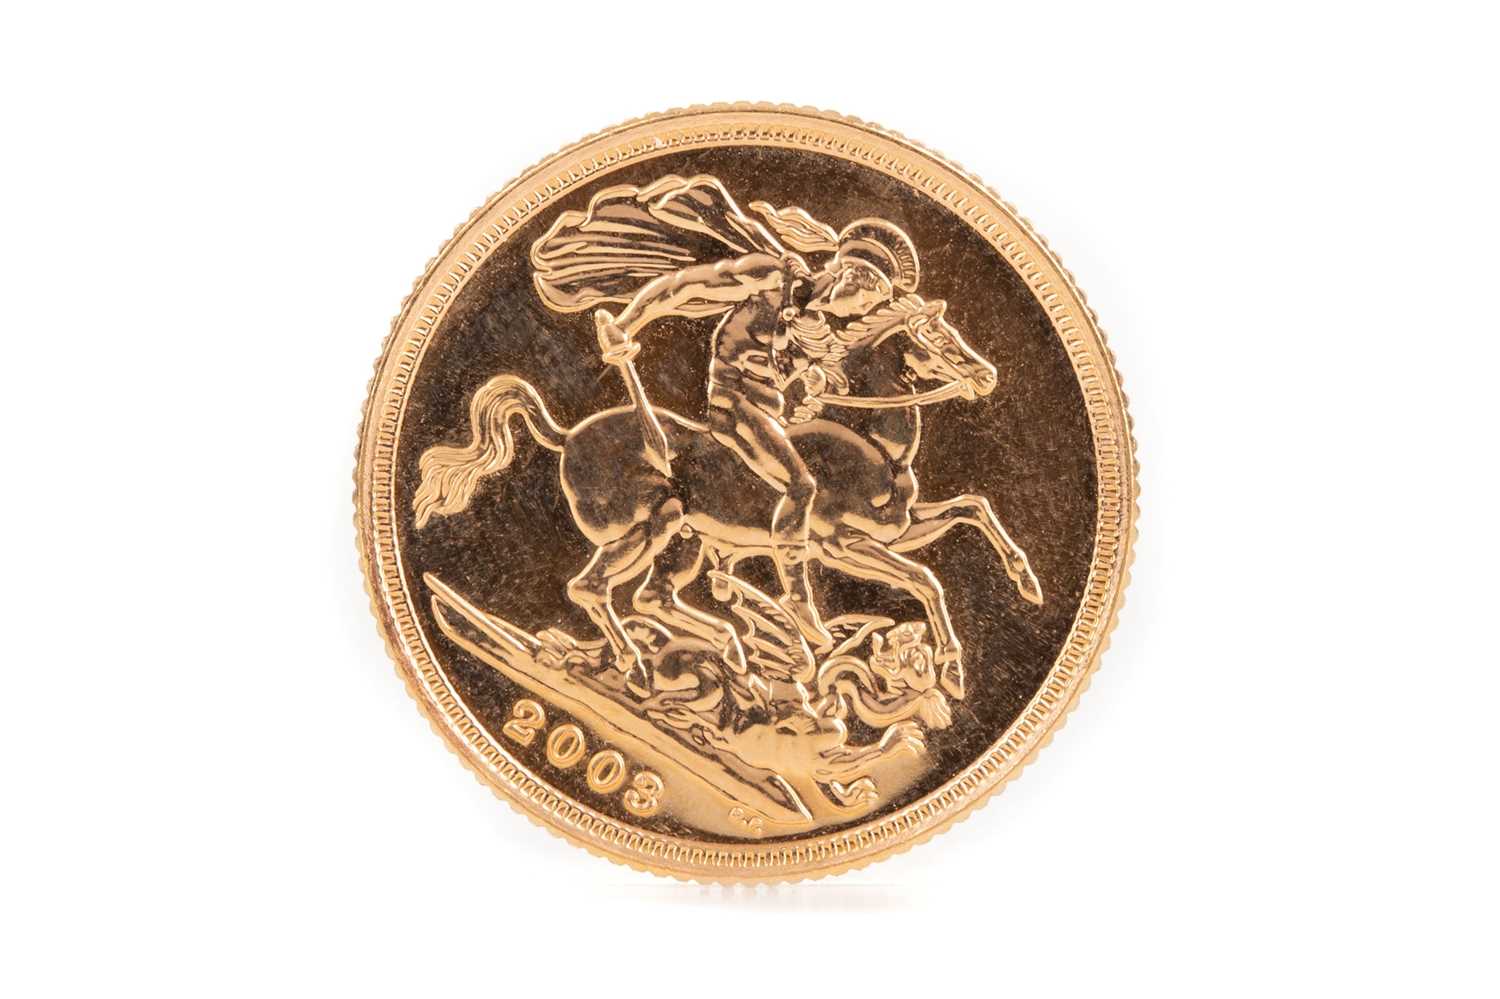 Lot 41 - AN ELIZABETH II GOLD SOVEREIGN DATED 2003